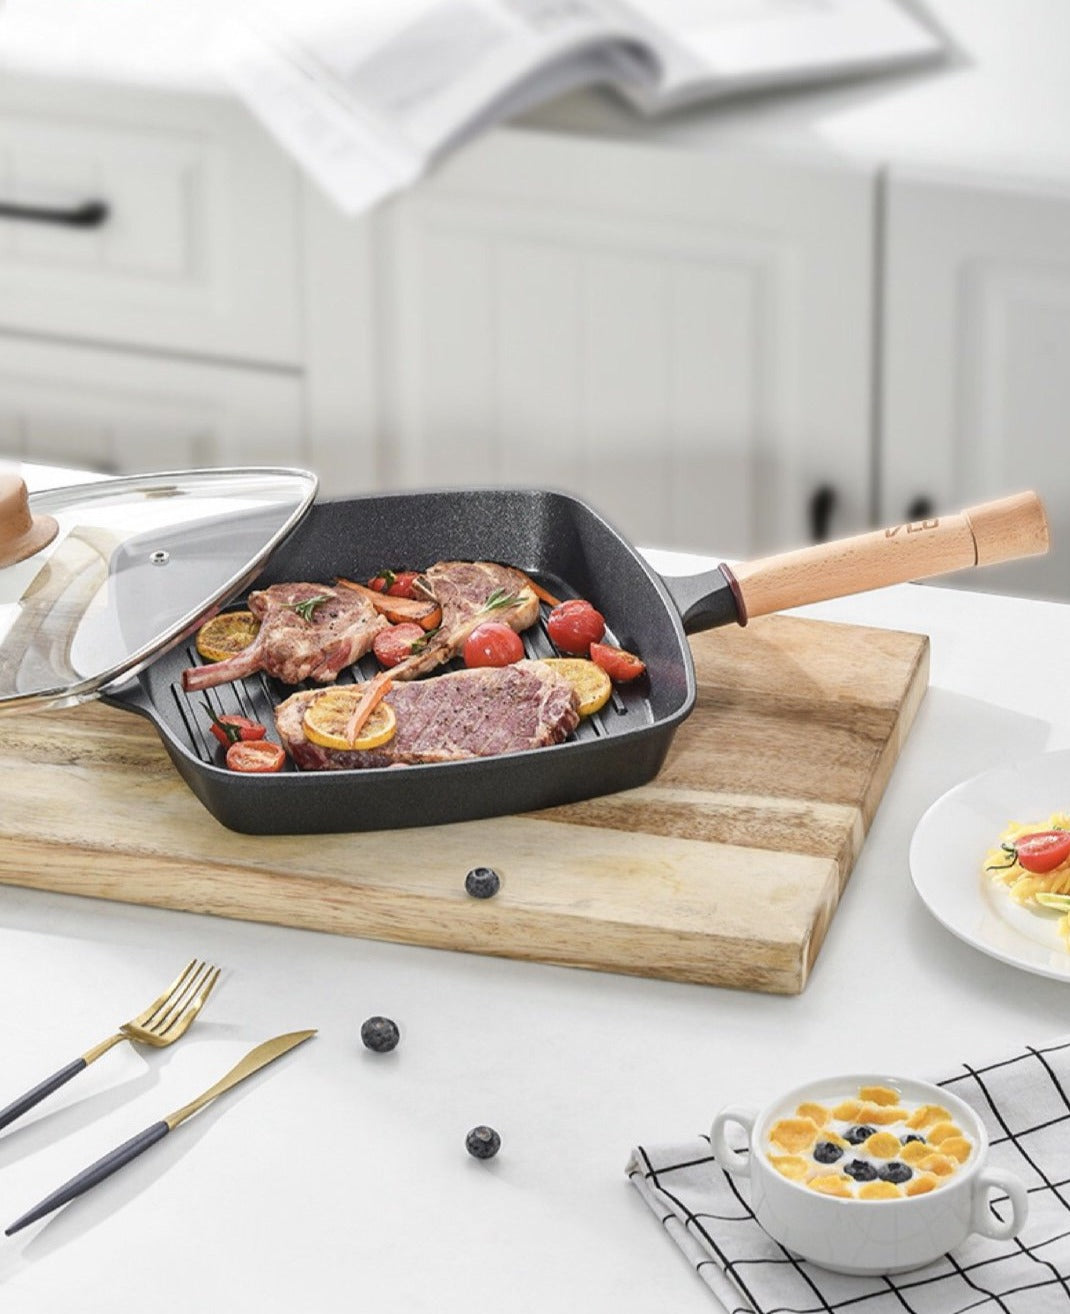 Non-stick Frying Pan with removable Handle Malo